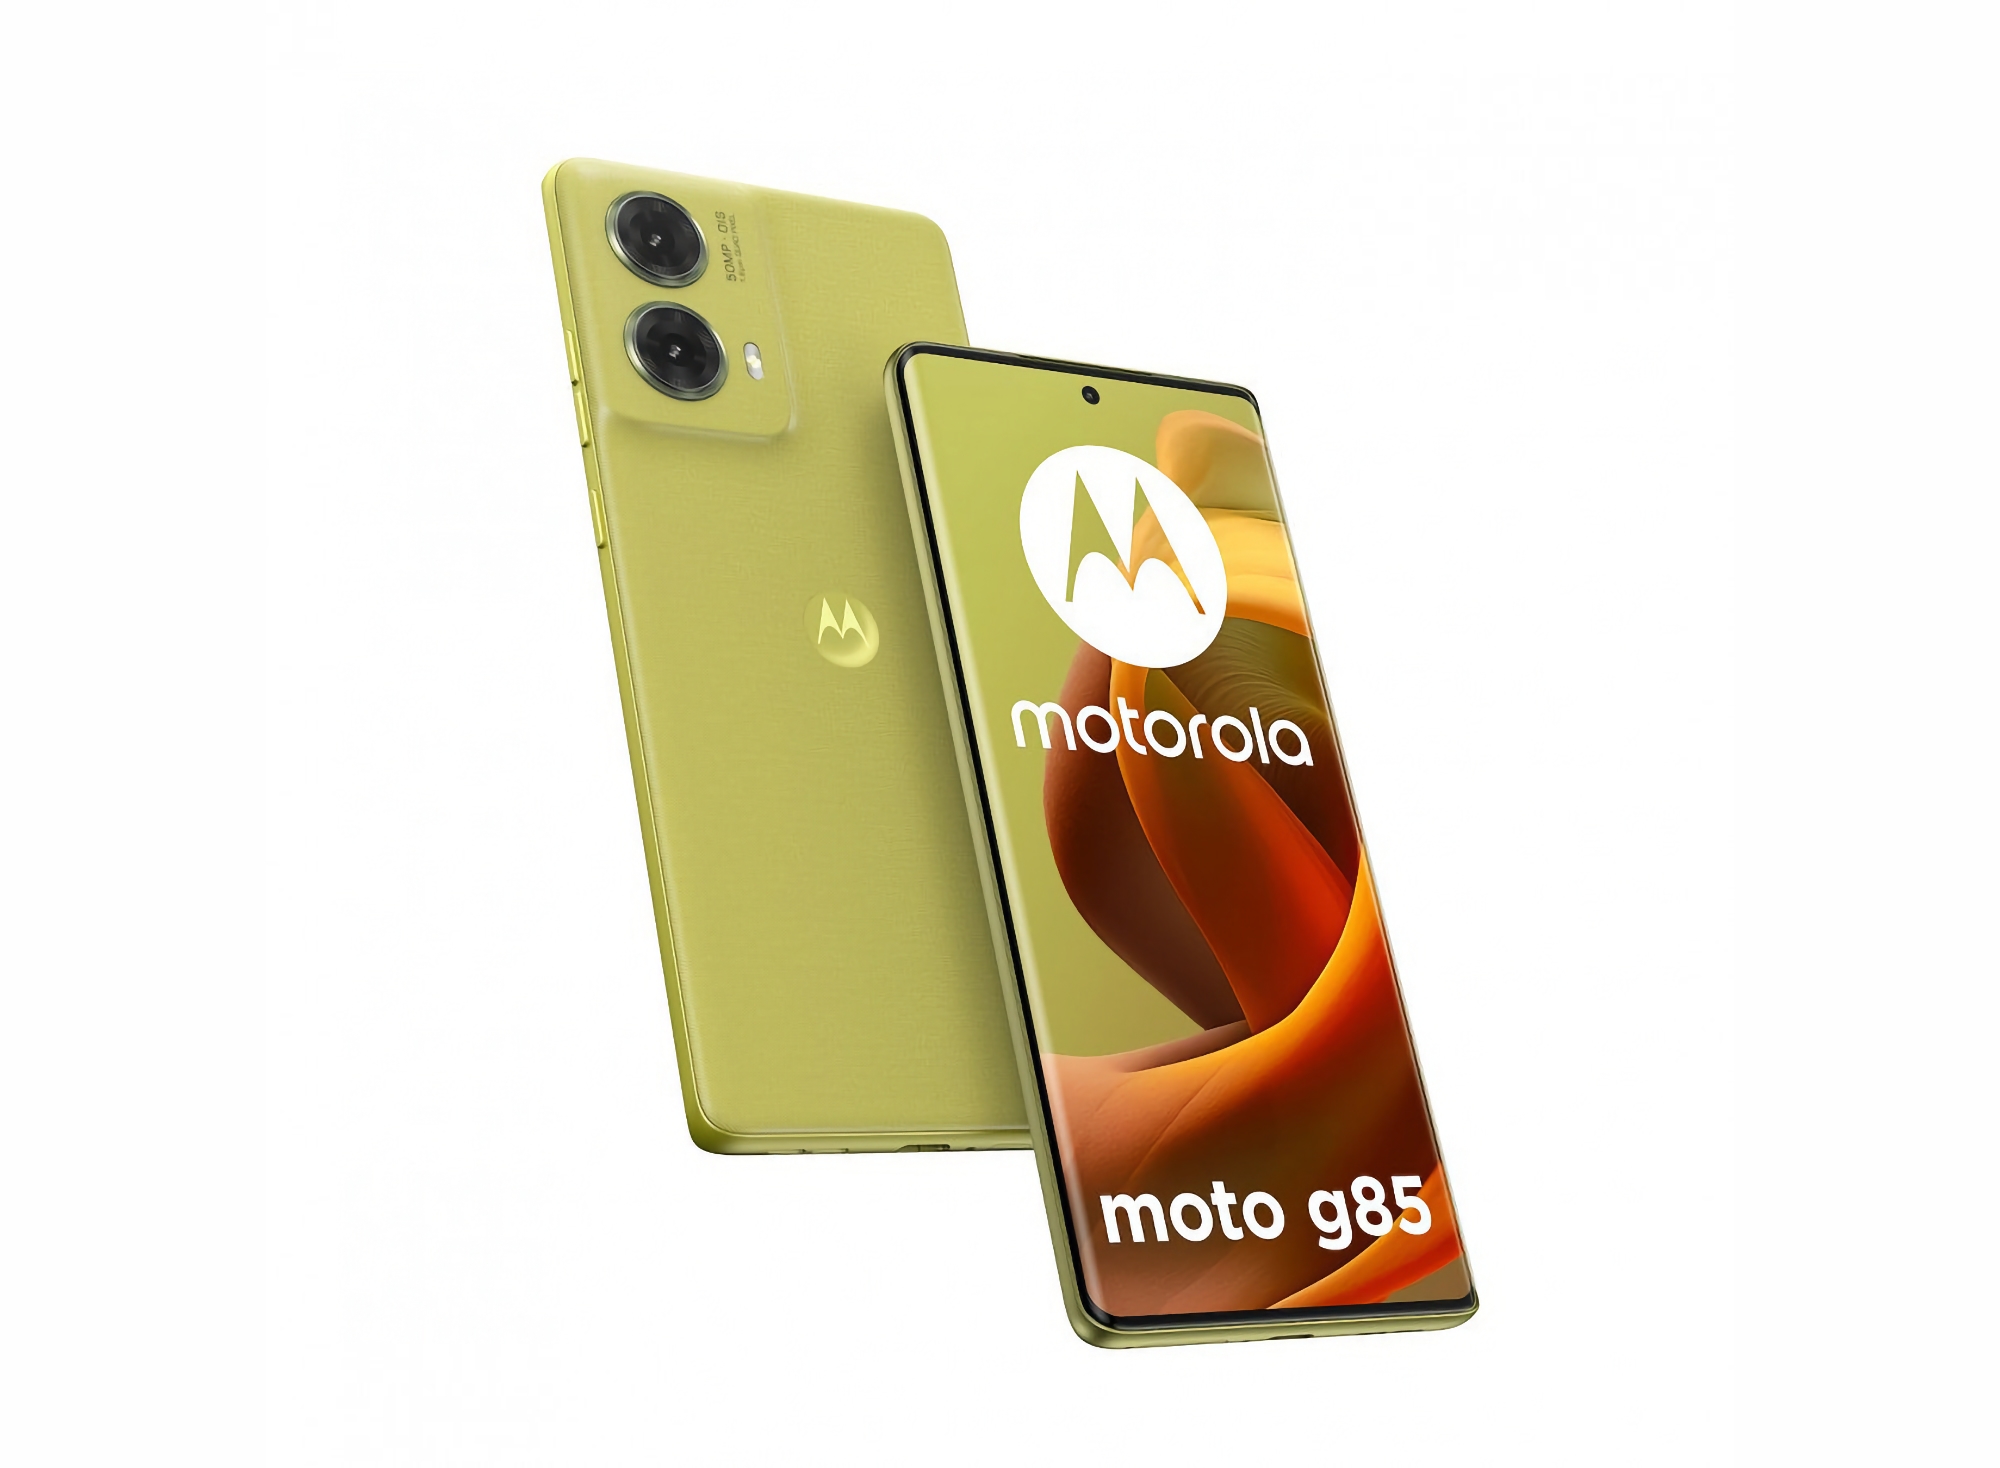 120Hz POLED display, Snapdragon 6s Gen 3 chip, 50 MP camera and €349 price: details of the Moto G85 smartphone have appeared online 